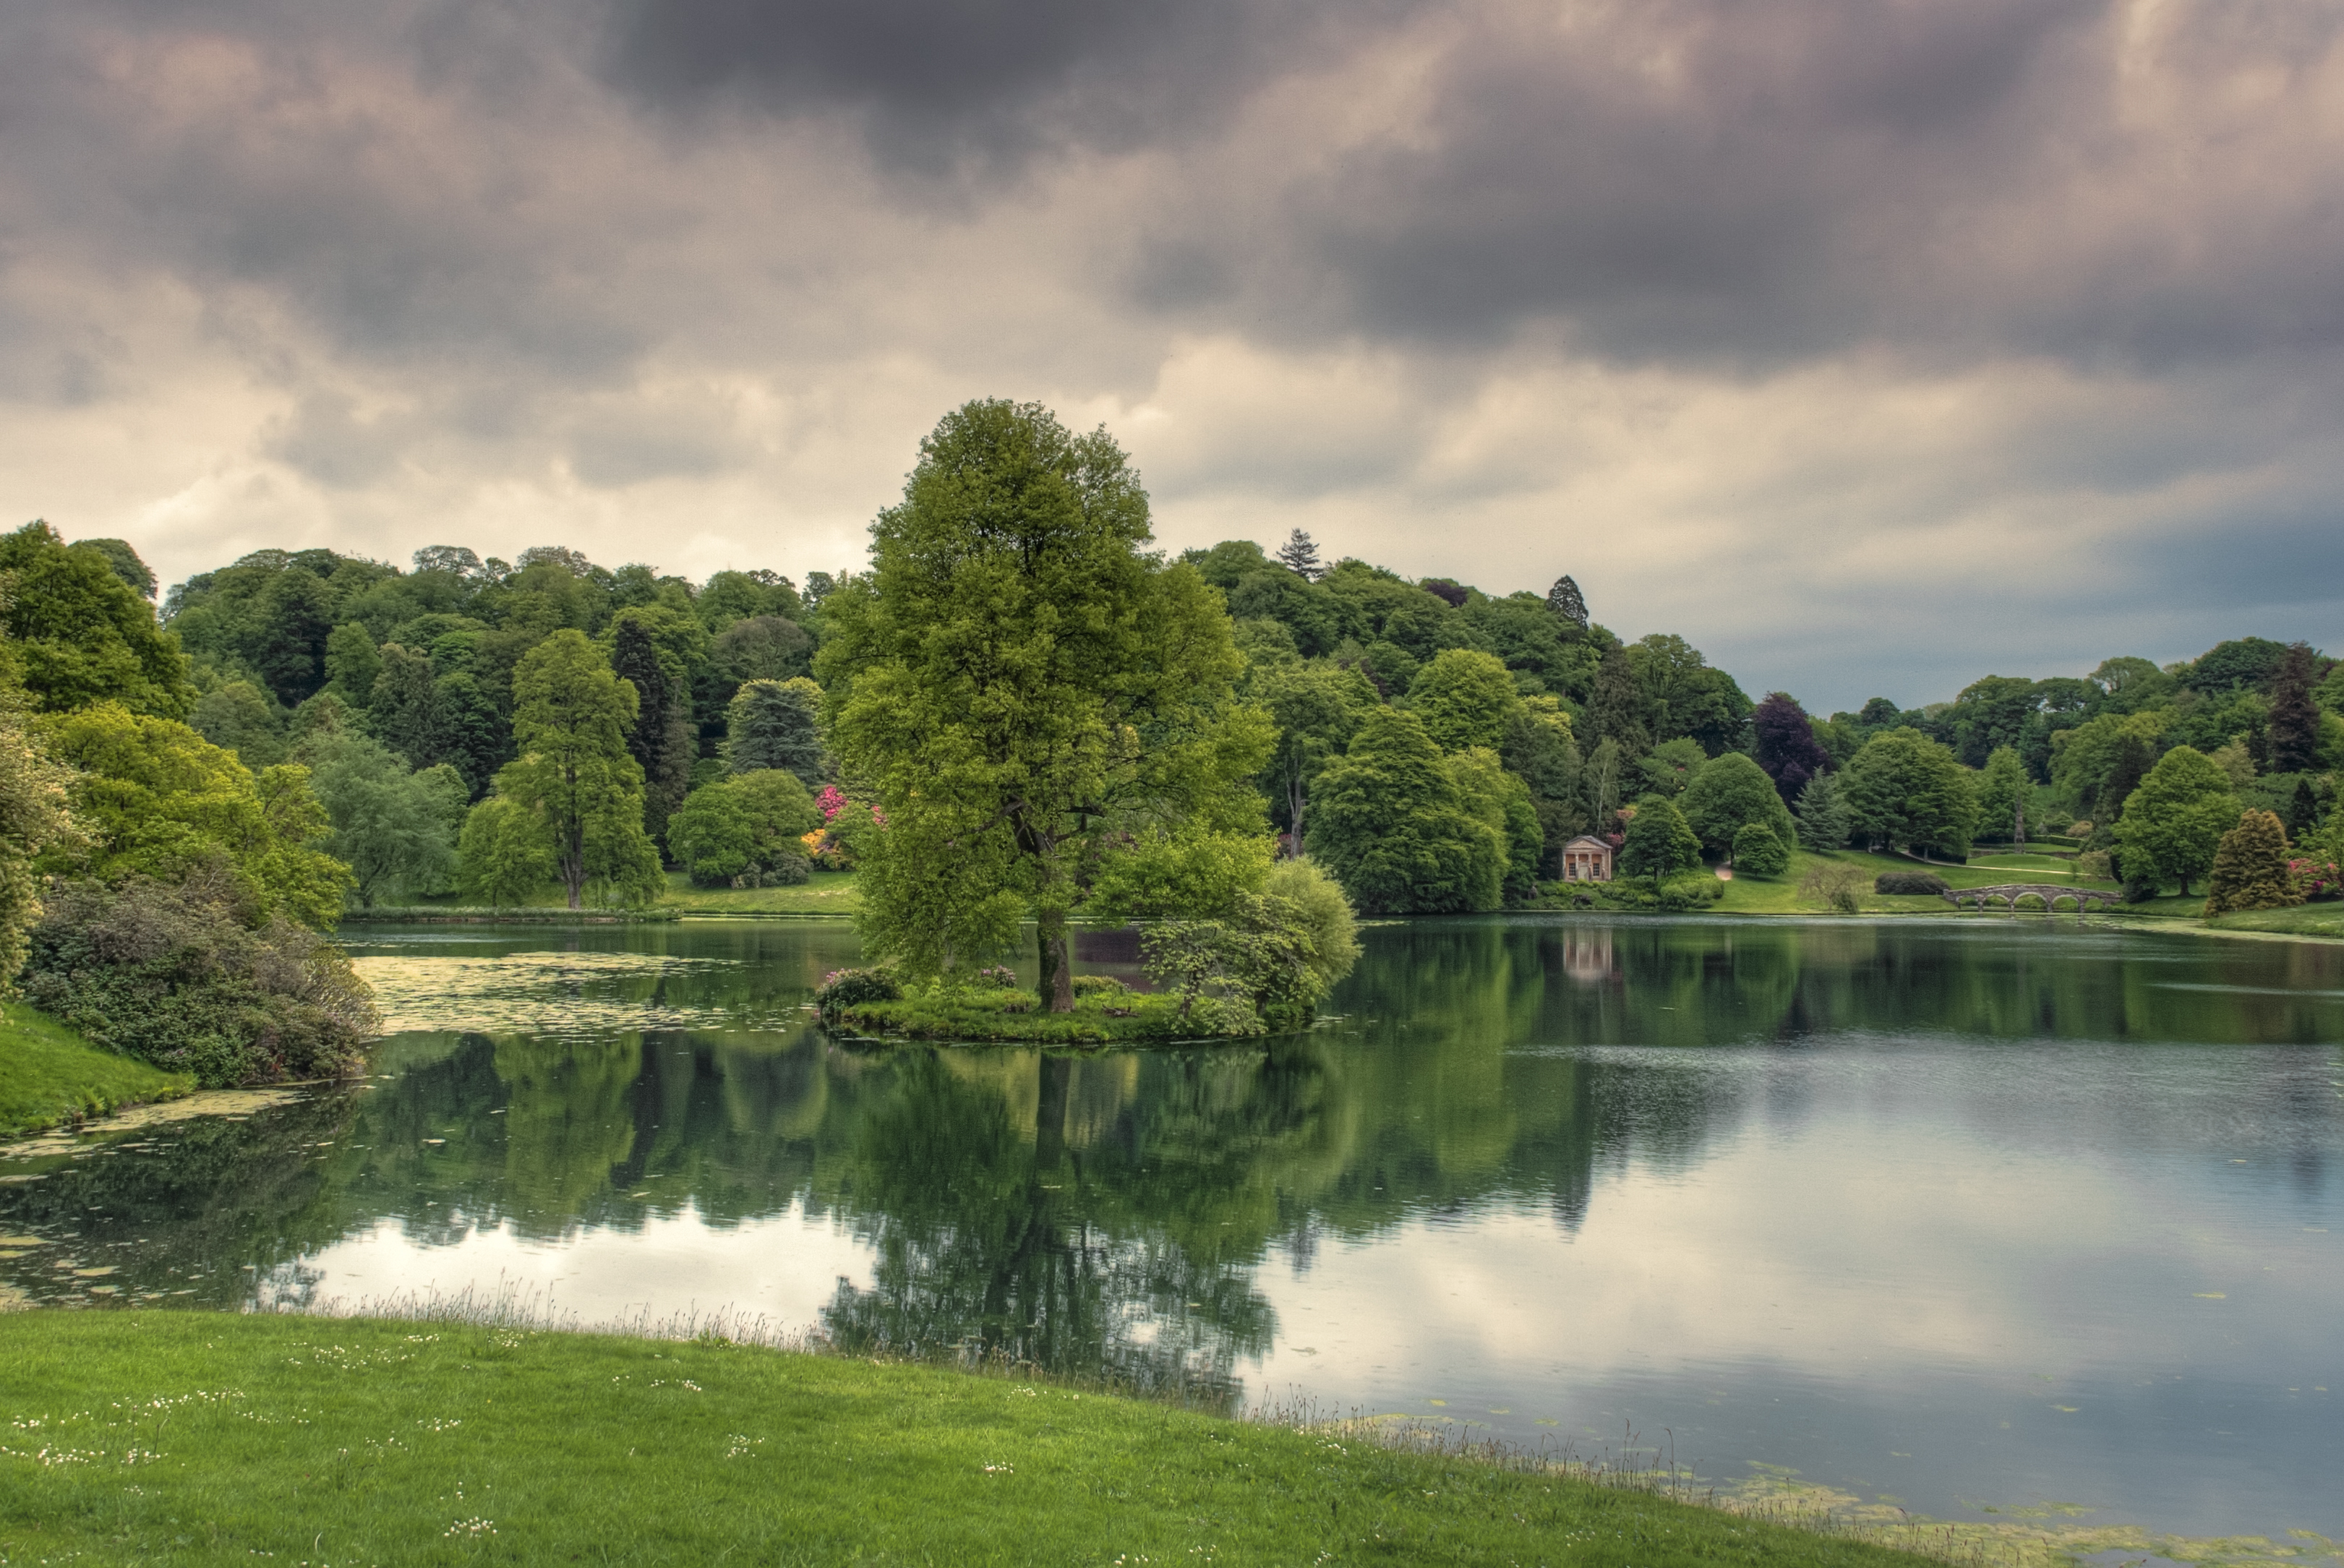 grass, nature, trees, lake, reflection, cloudy